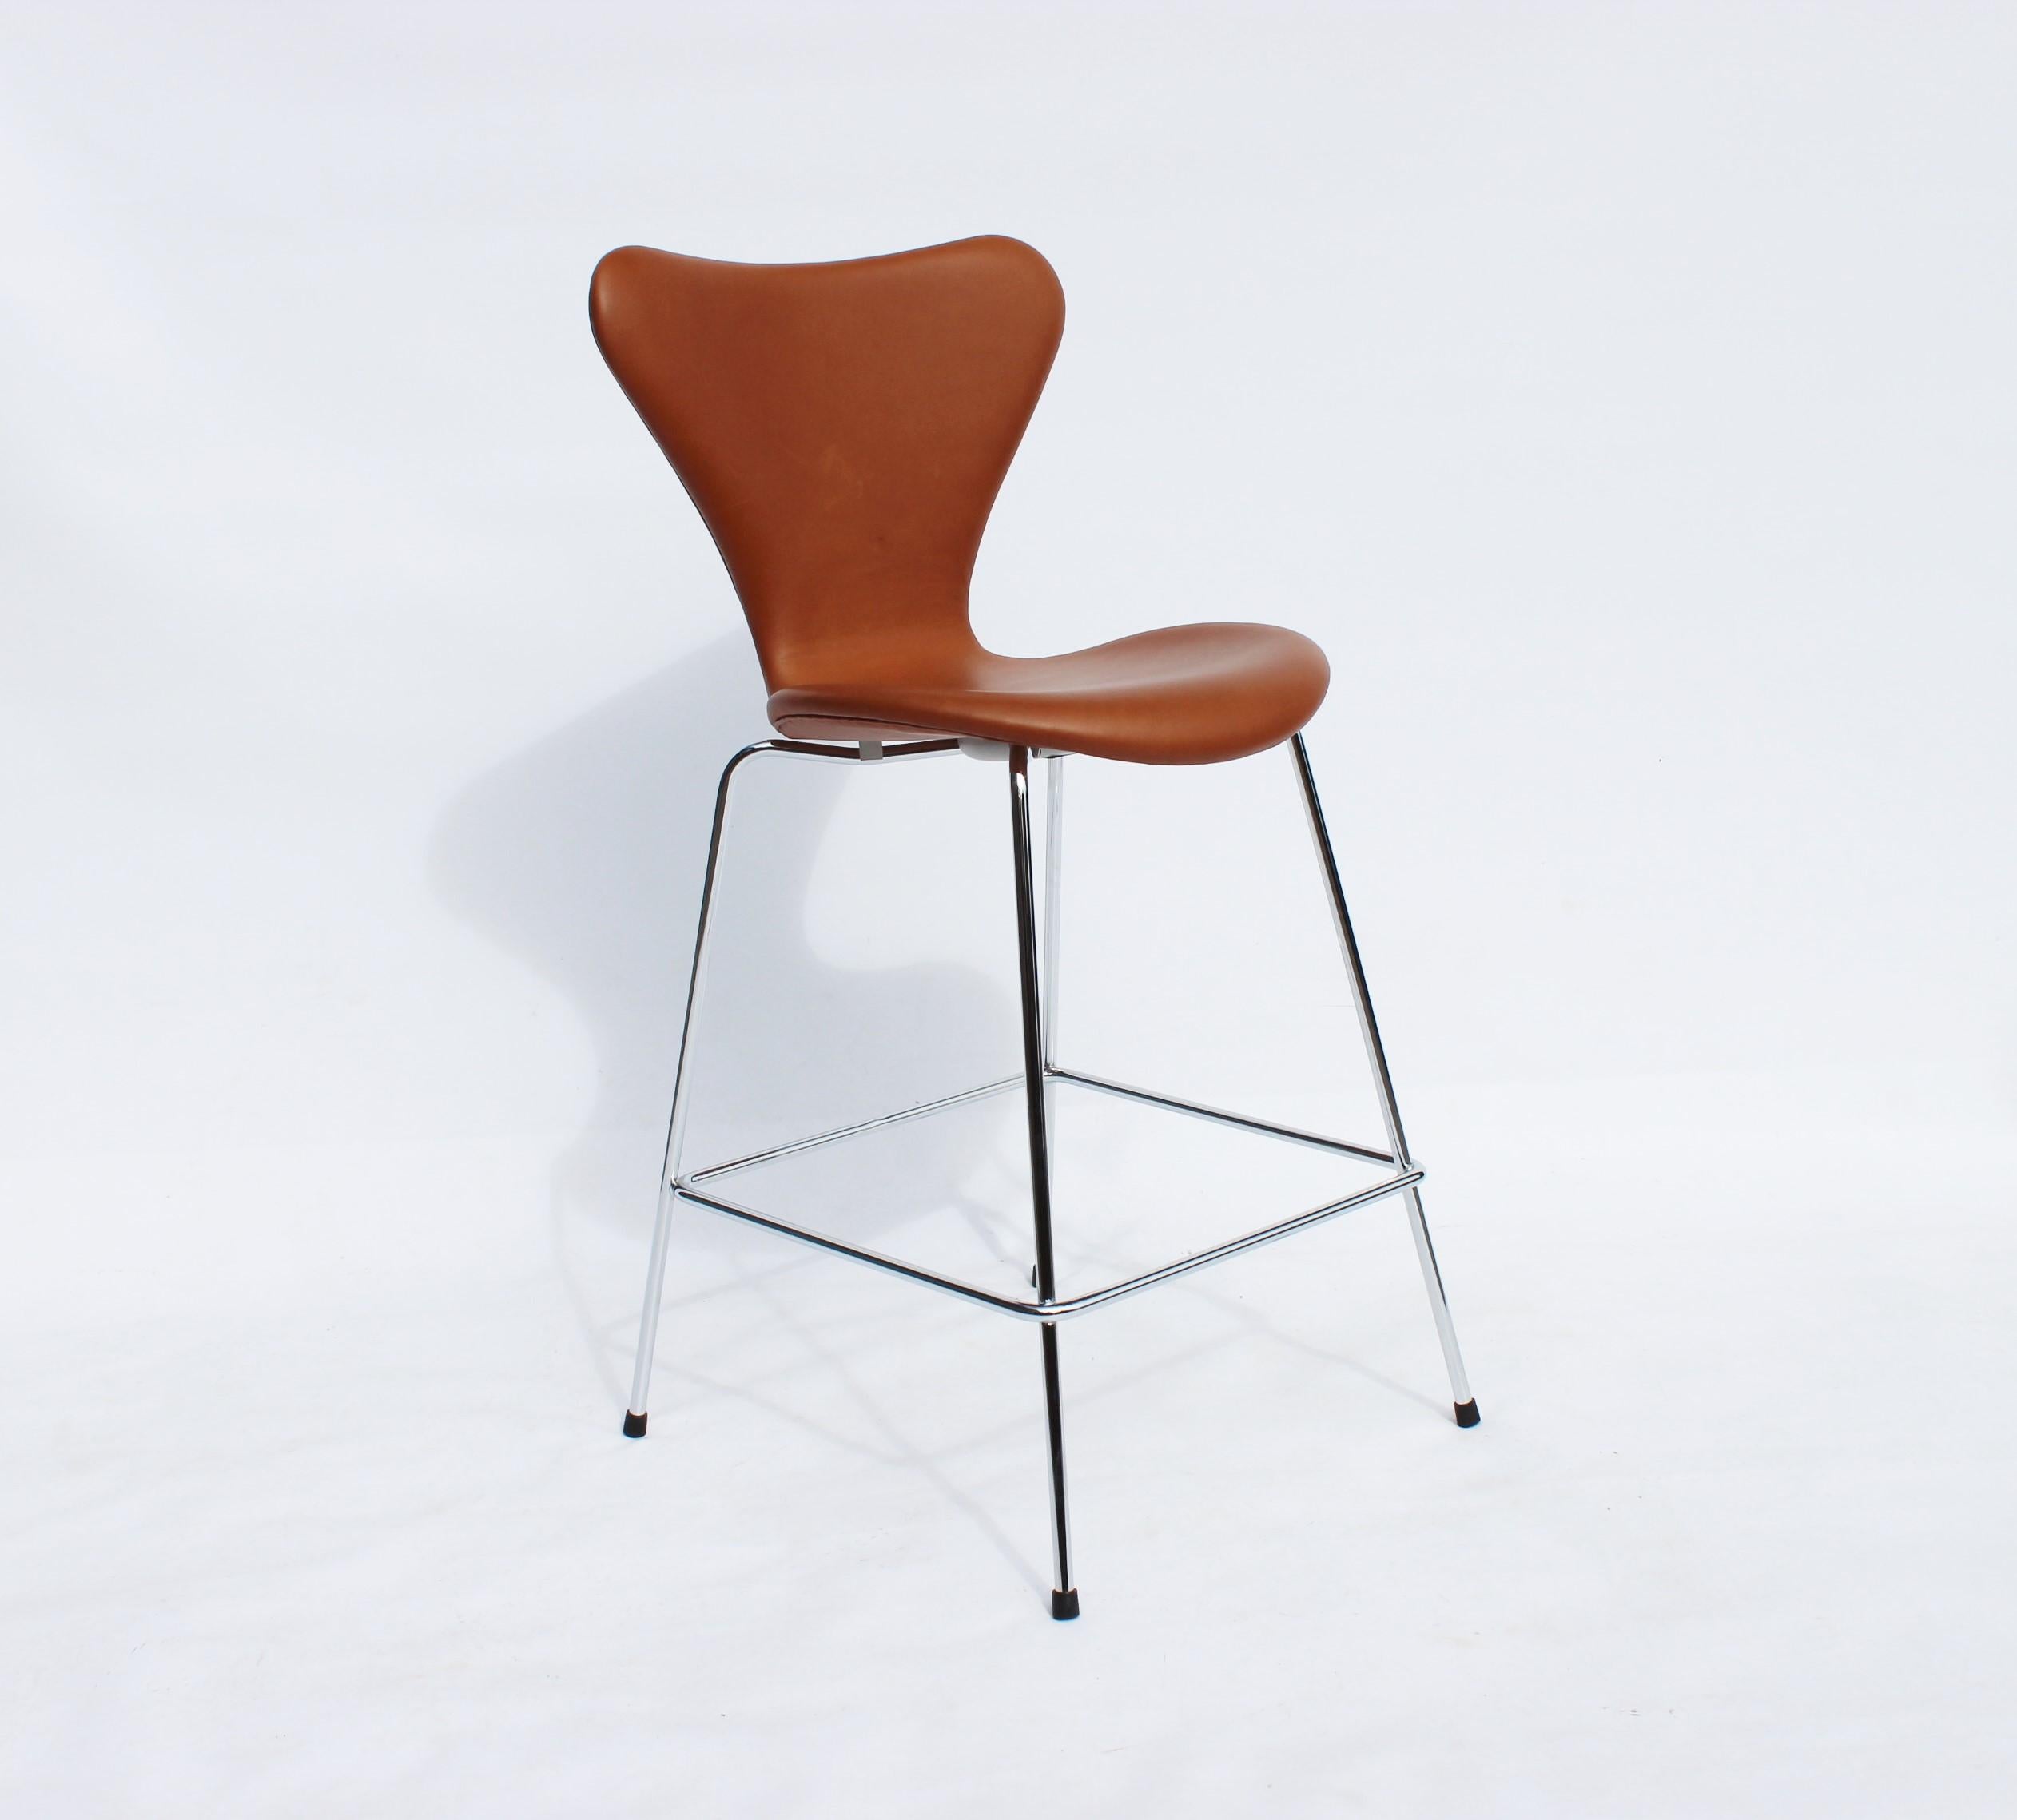 A pair of seven bar stools, model 3187, with cognac leather designed by Arne Jacobsen and manufactured by Fritz Hansen in 2019. The chairs are in excellent condition.